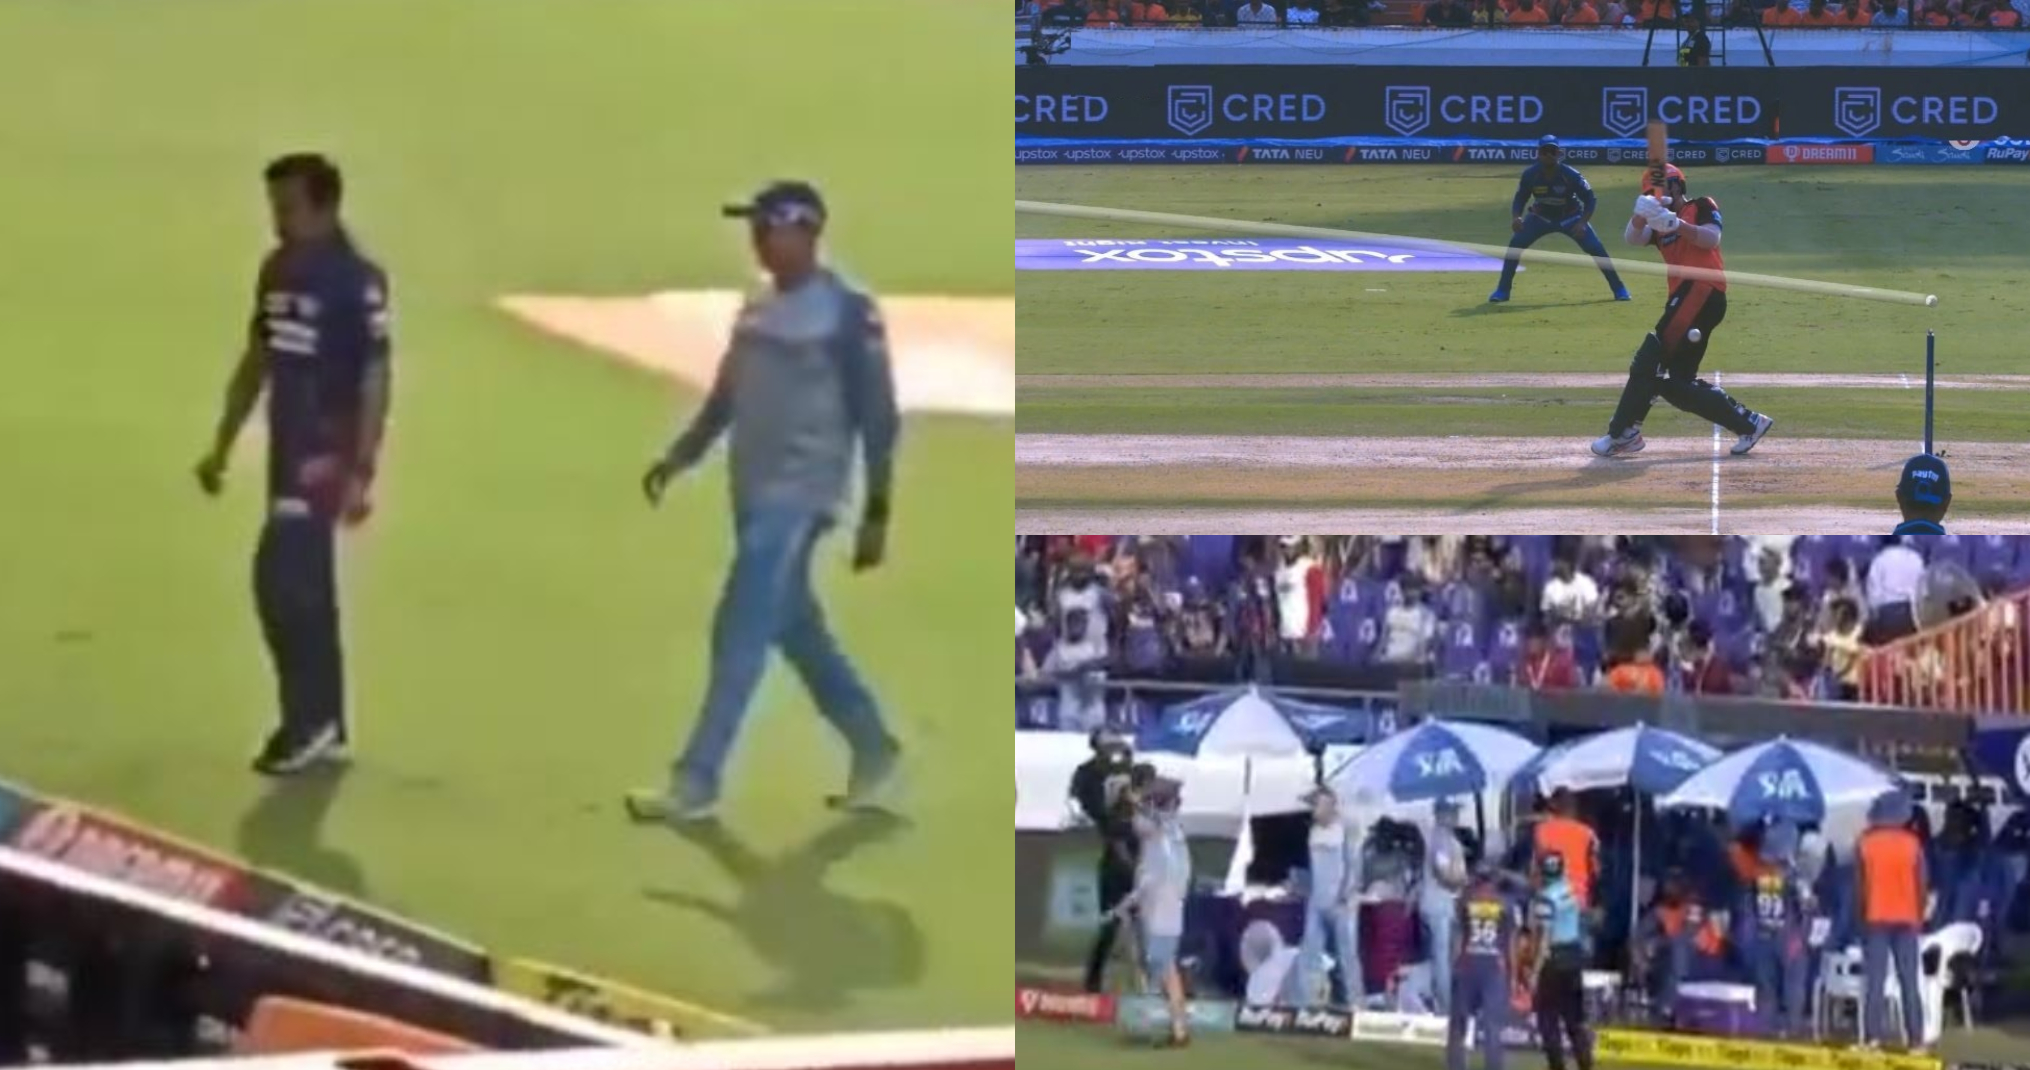 A no-ball started quite a furor in Hyderabad crowd | Twitter